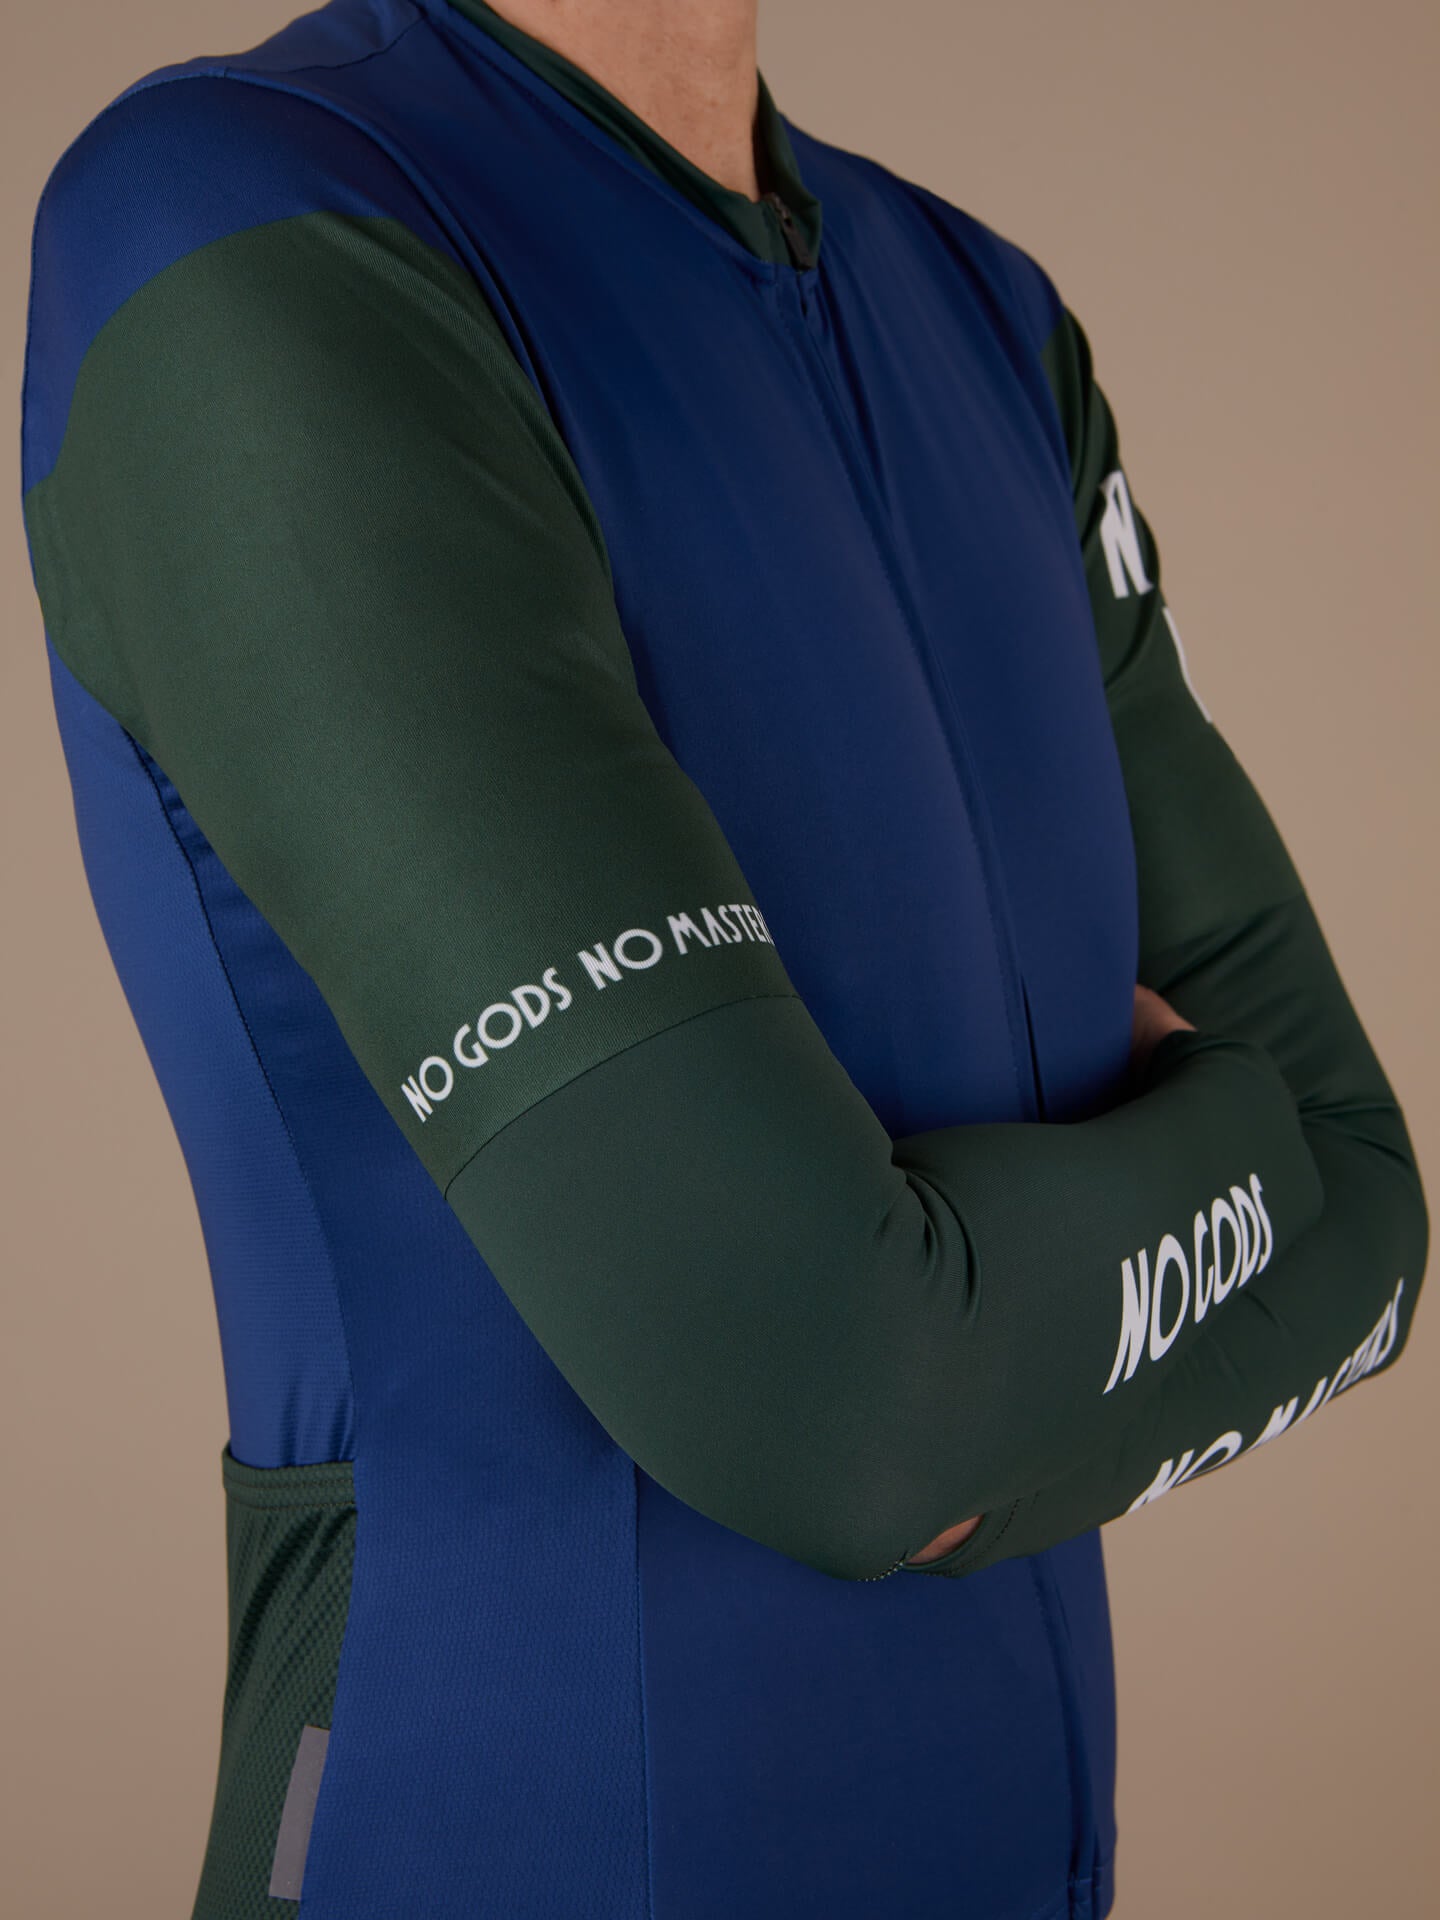 arm warmers pine green white logo sleeves extention